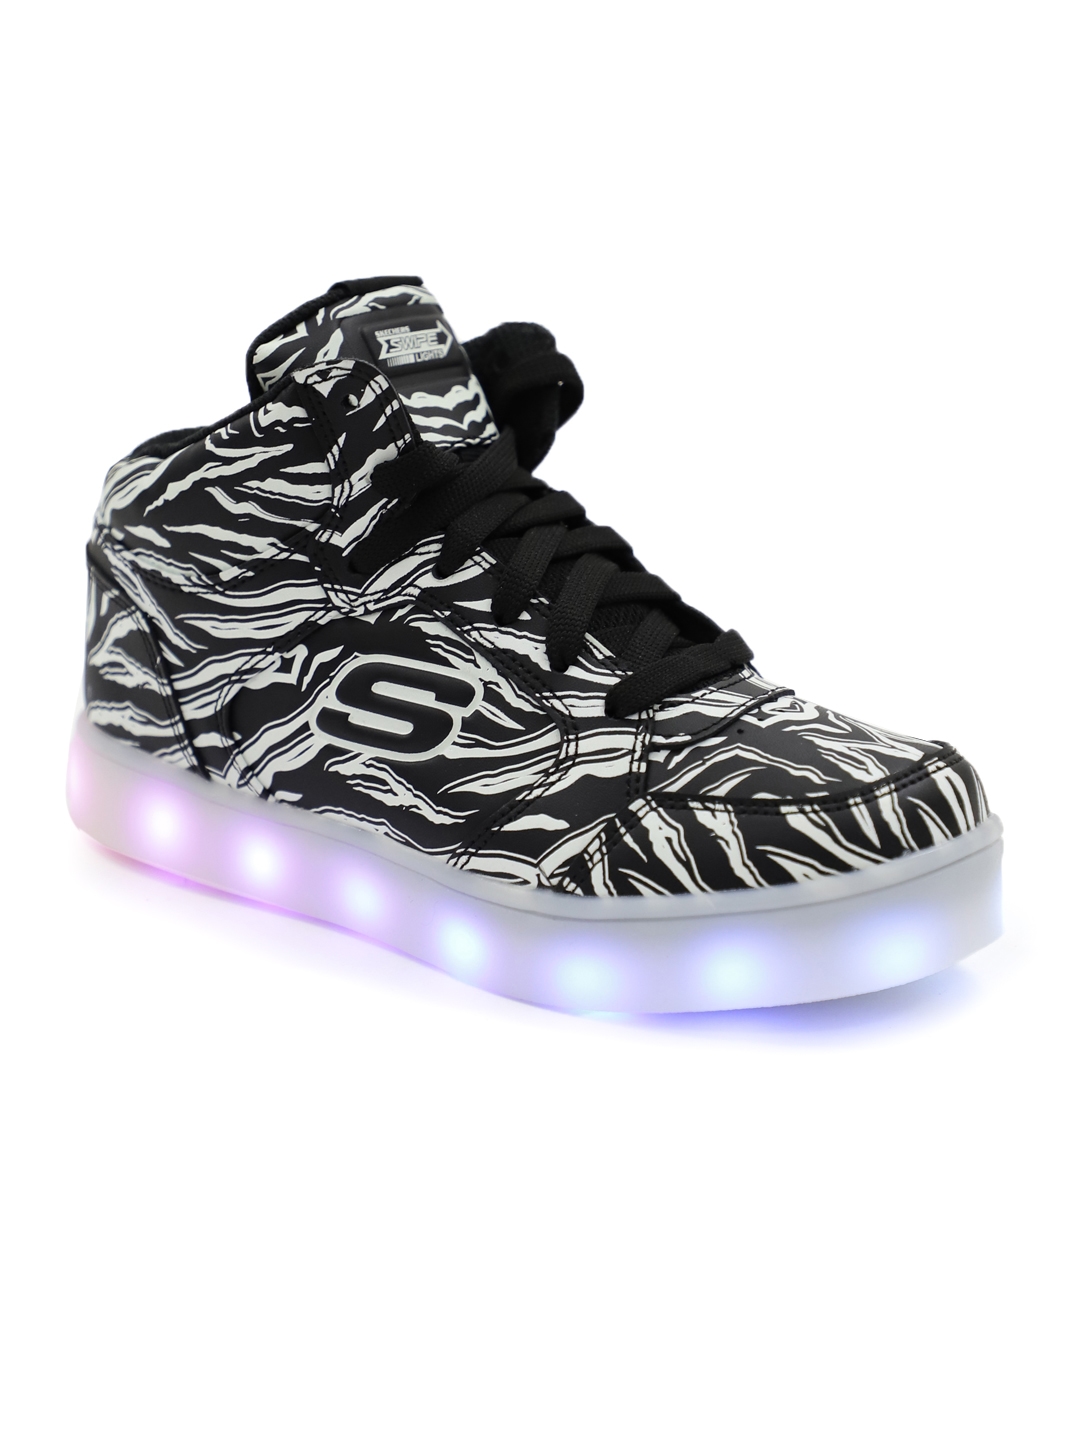 Buy Skechers Boys Black Limited Edition Energy Lights Outglow Sneakers Lights - Casual Shoes for Boys 6672702 | Myntra